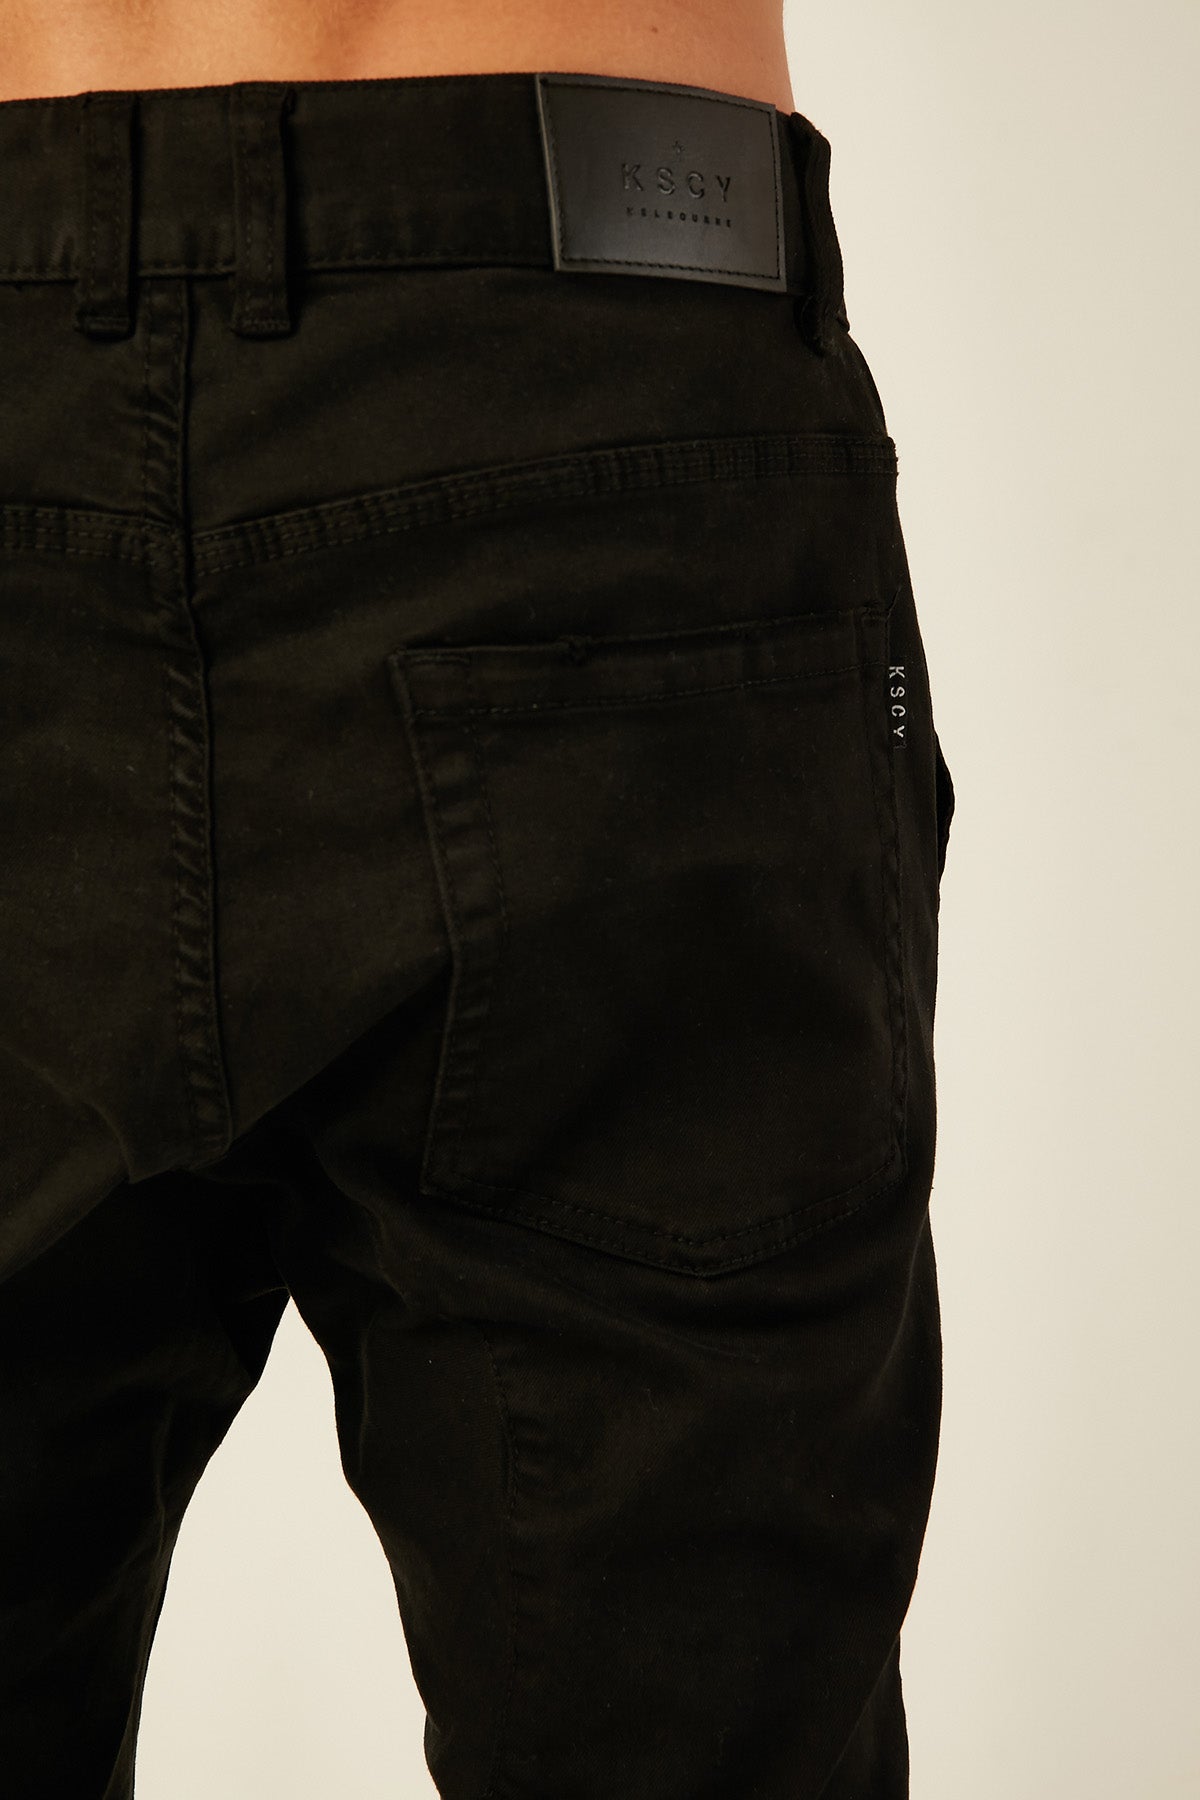 Kiss Chacey Alpha Jogger Jean Jet Black – Universal Store